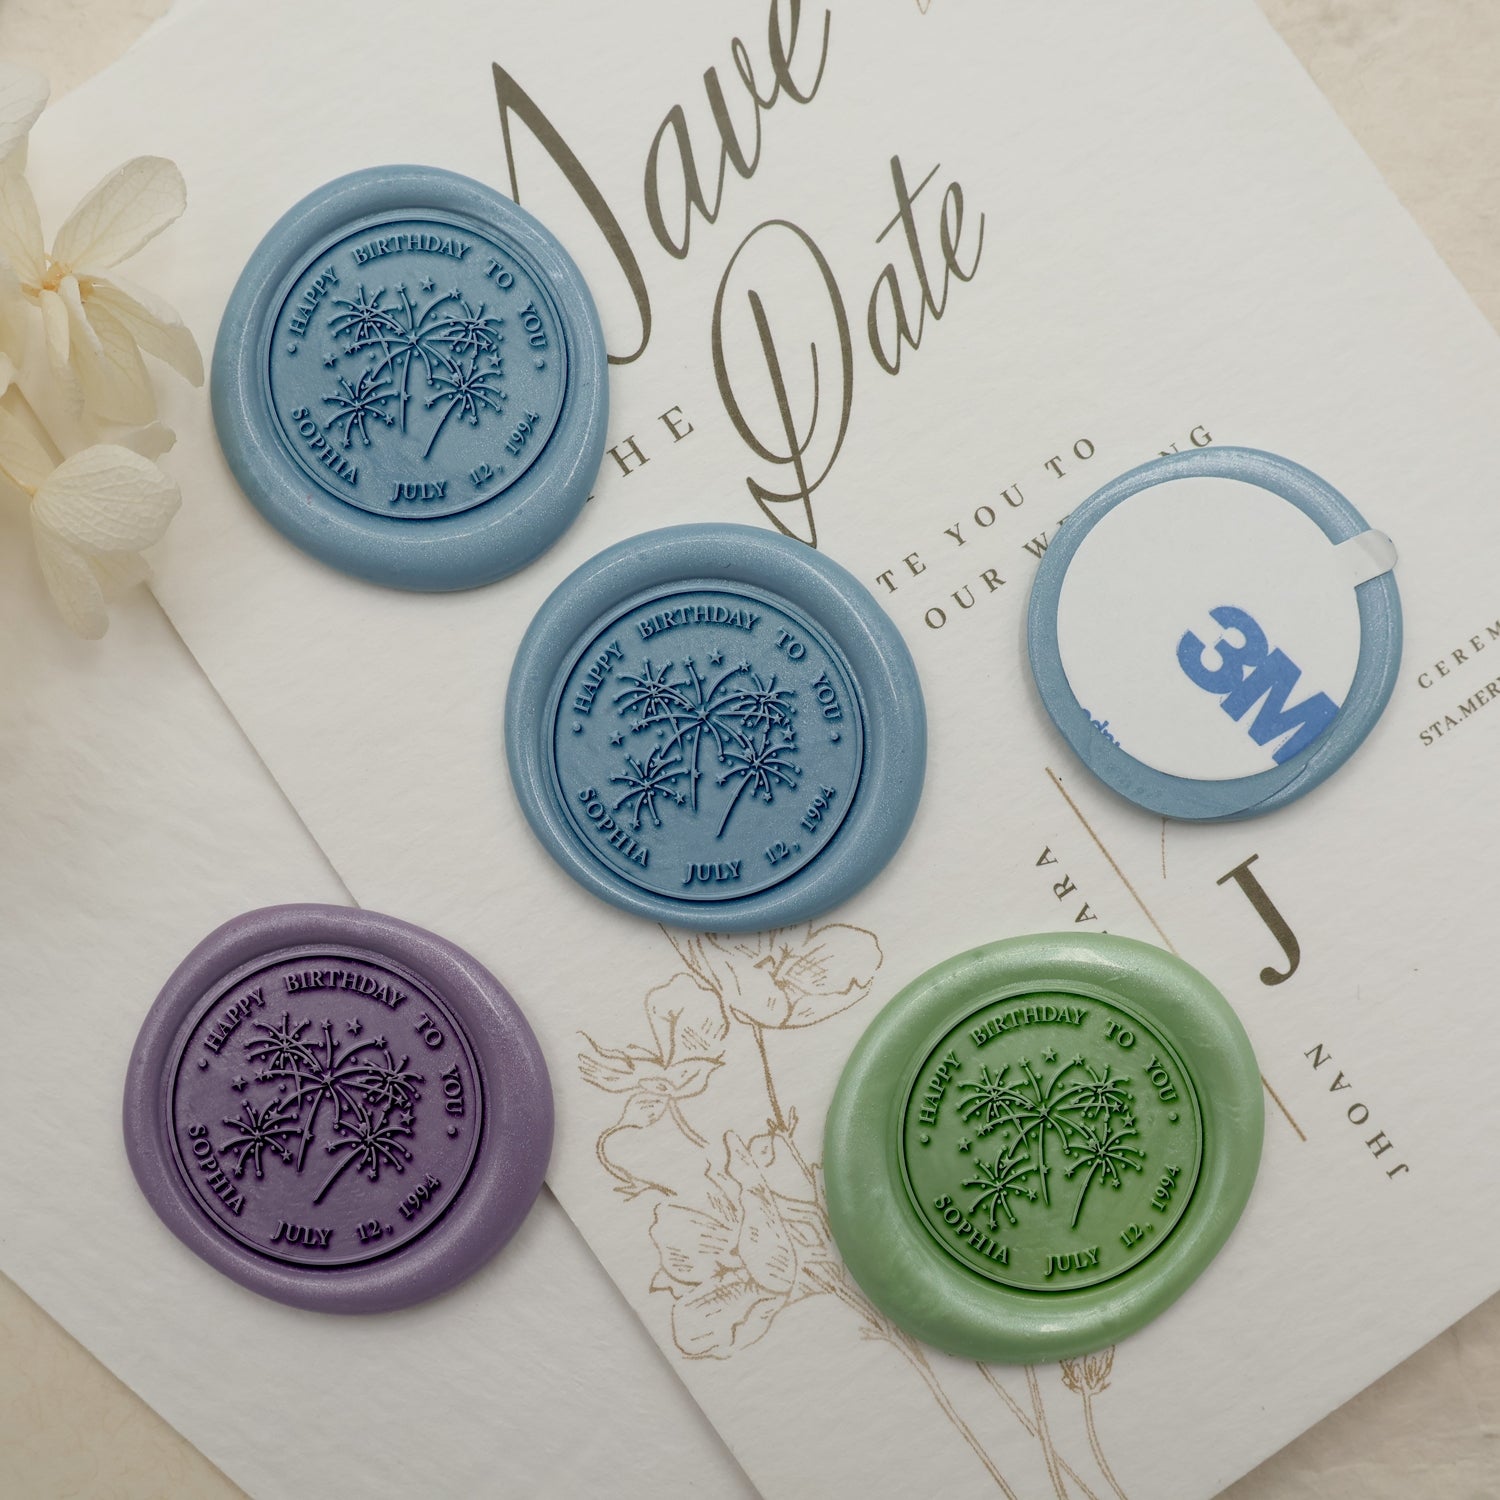 Custom Wax Seal Stickers Personalized Adhesive Wax Seals with Logo Design  Ideal for Wedding Invitations Envelope Journal Scrapbook-Own Design